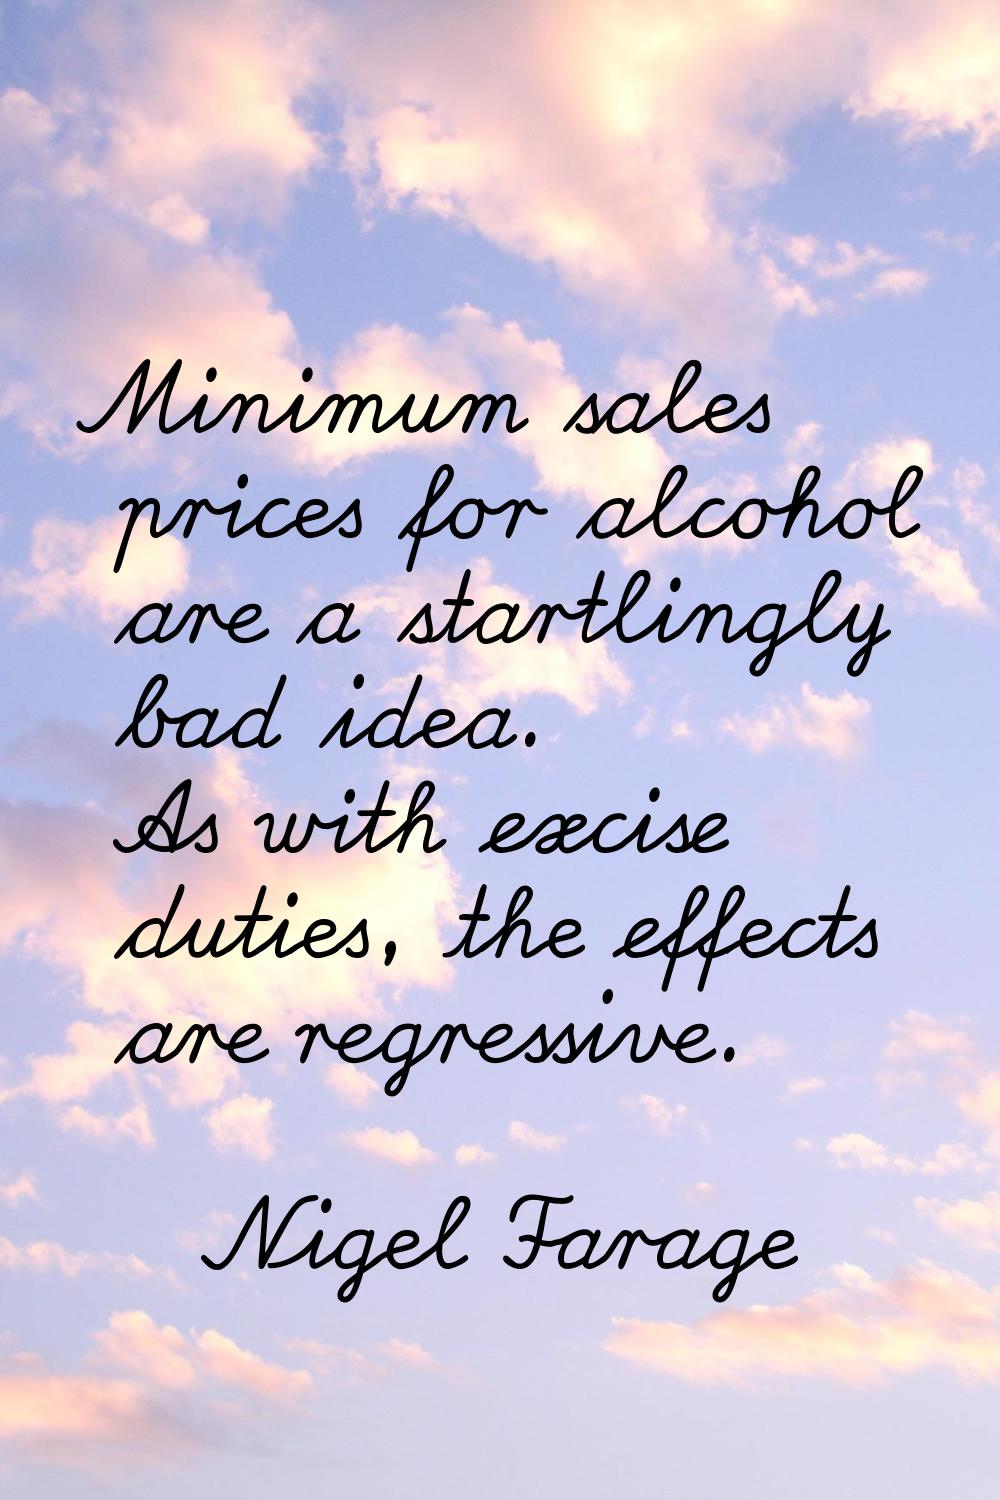 Minimum sales prices for alcohol are a startlingly bad idea. As with excise duties, the effects are